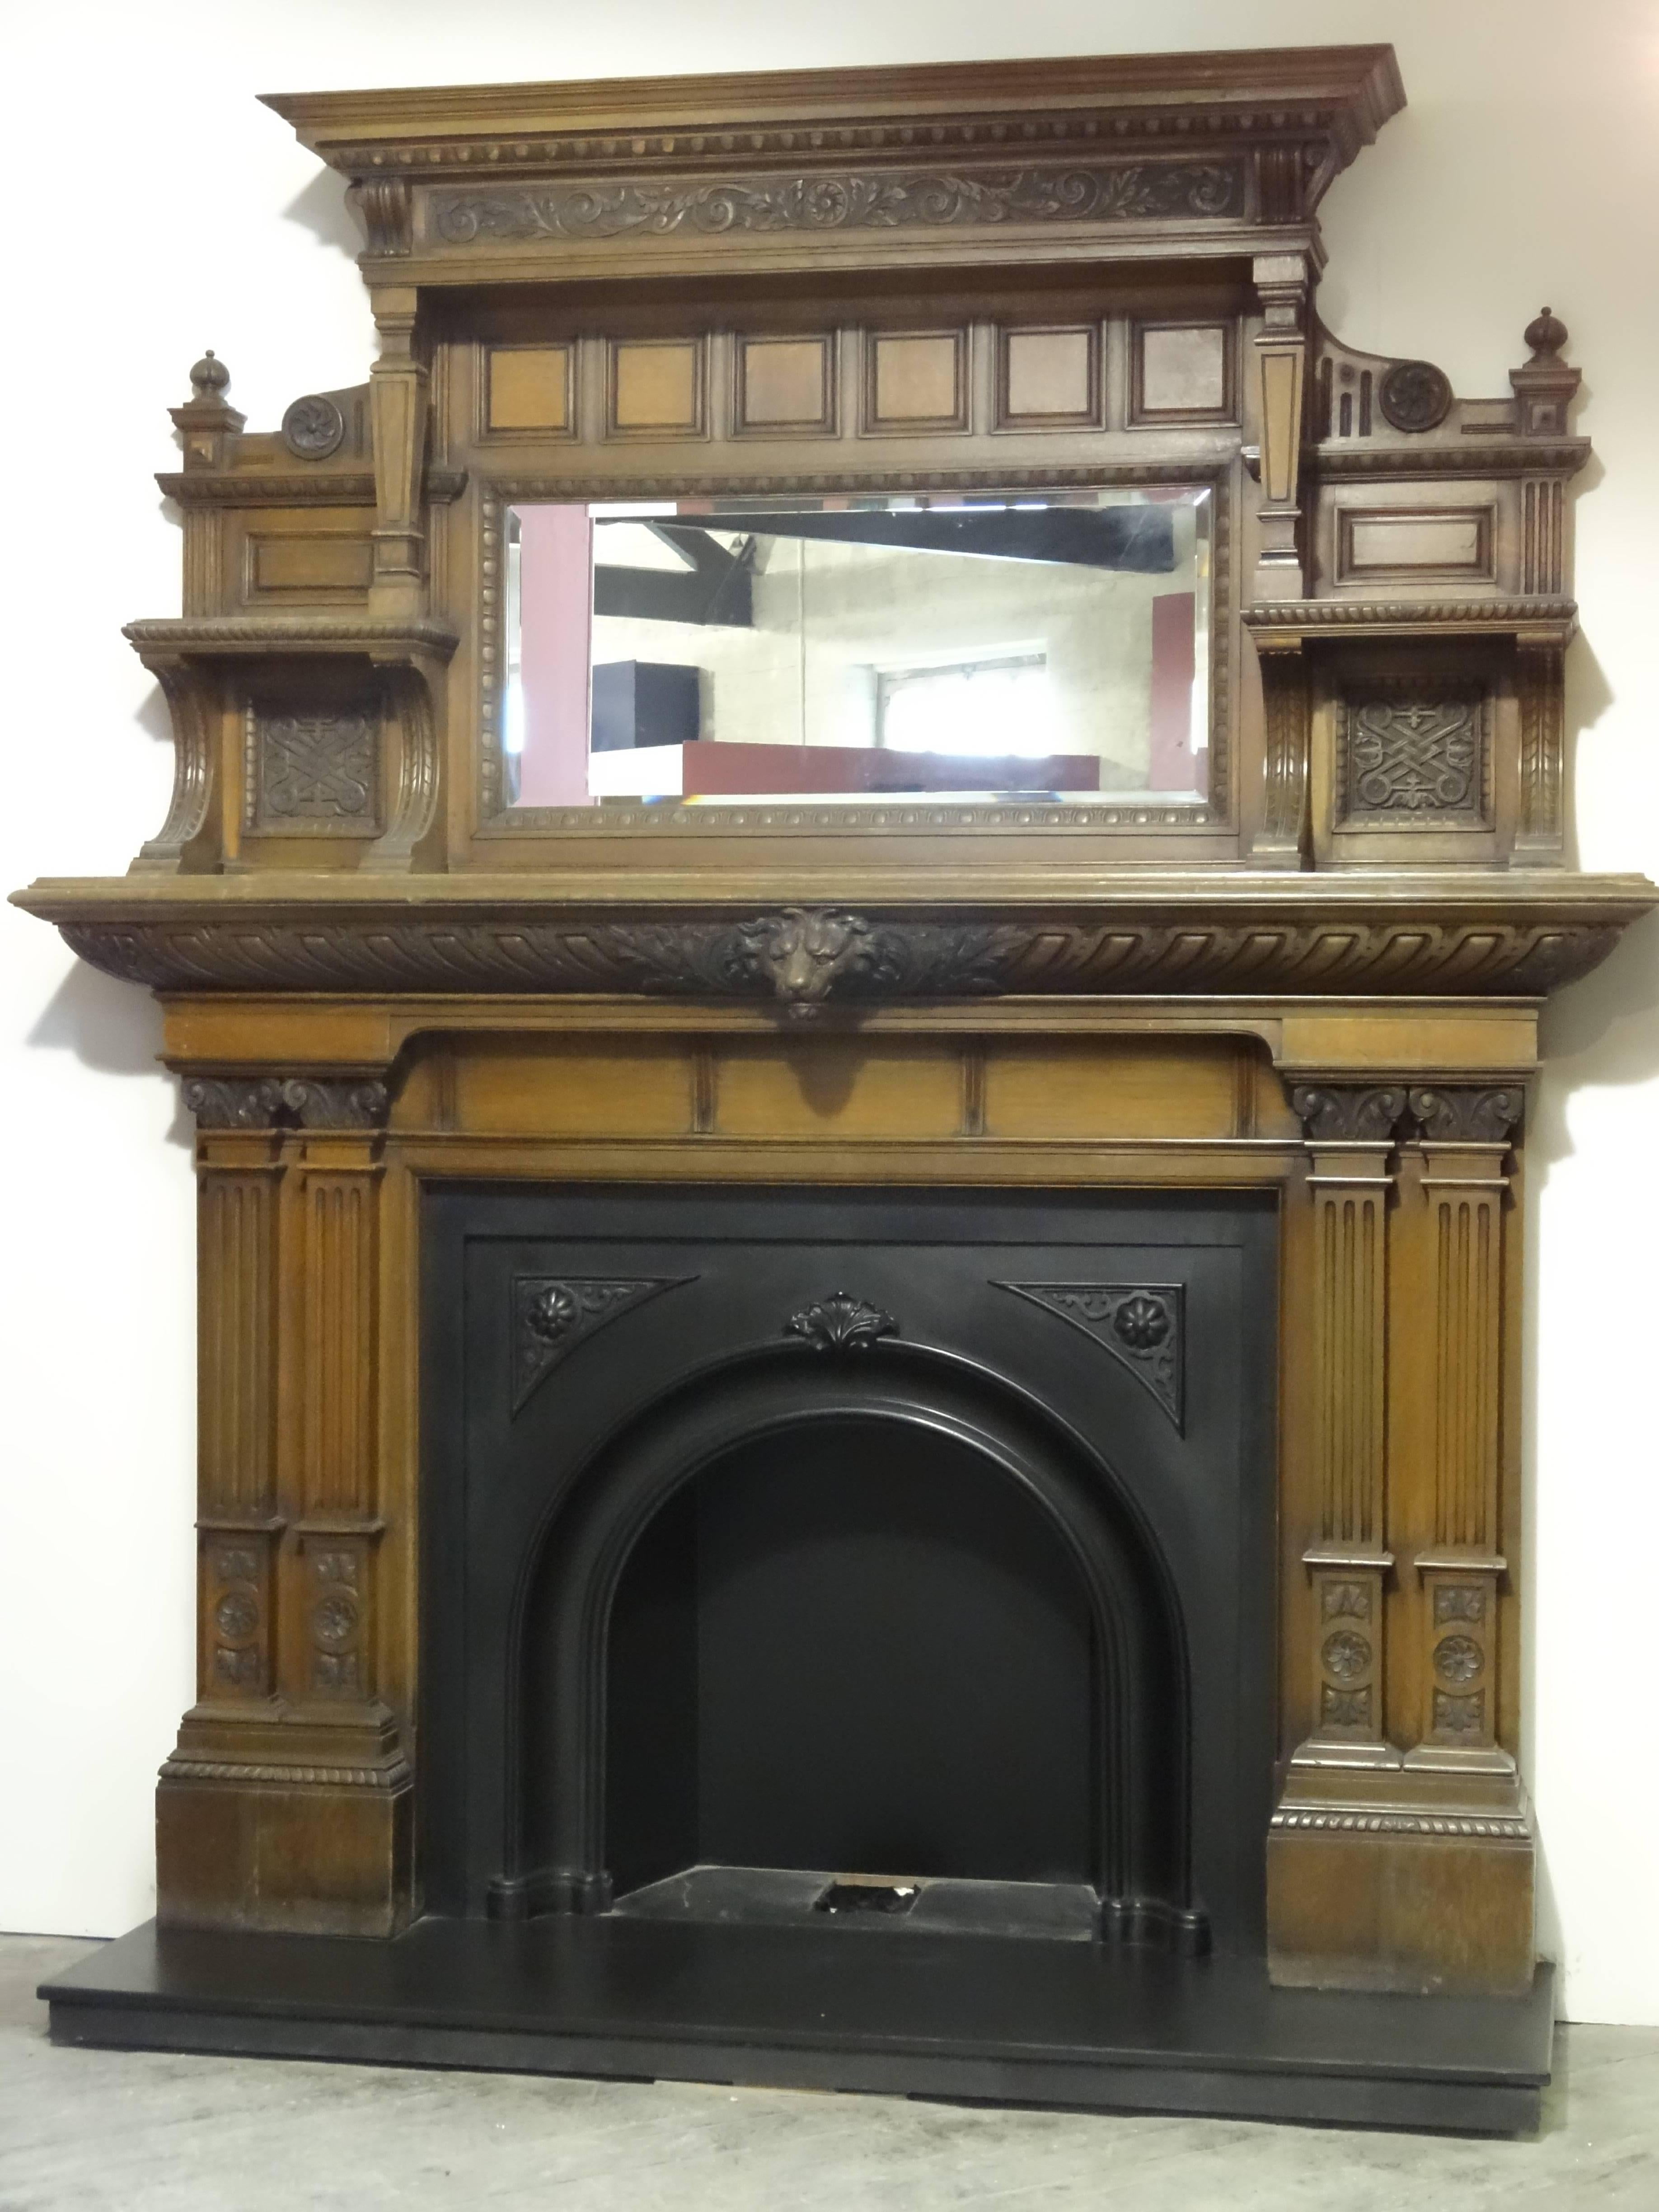 Reclaimed antique Victorian ornately carved oak fire surround and overmantel mirror, with impressive carved lion's head mask. The fire surround is complimented with the antique Victorian arched cast iron insert suitable for freestanding dog grate